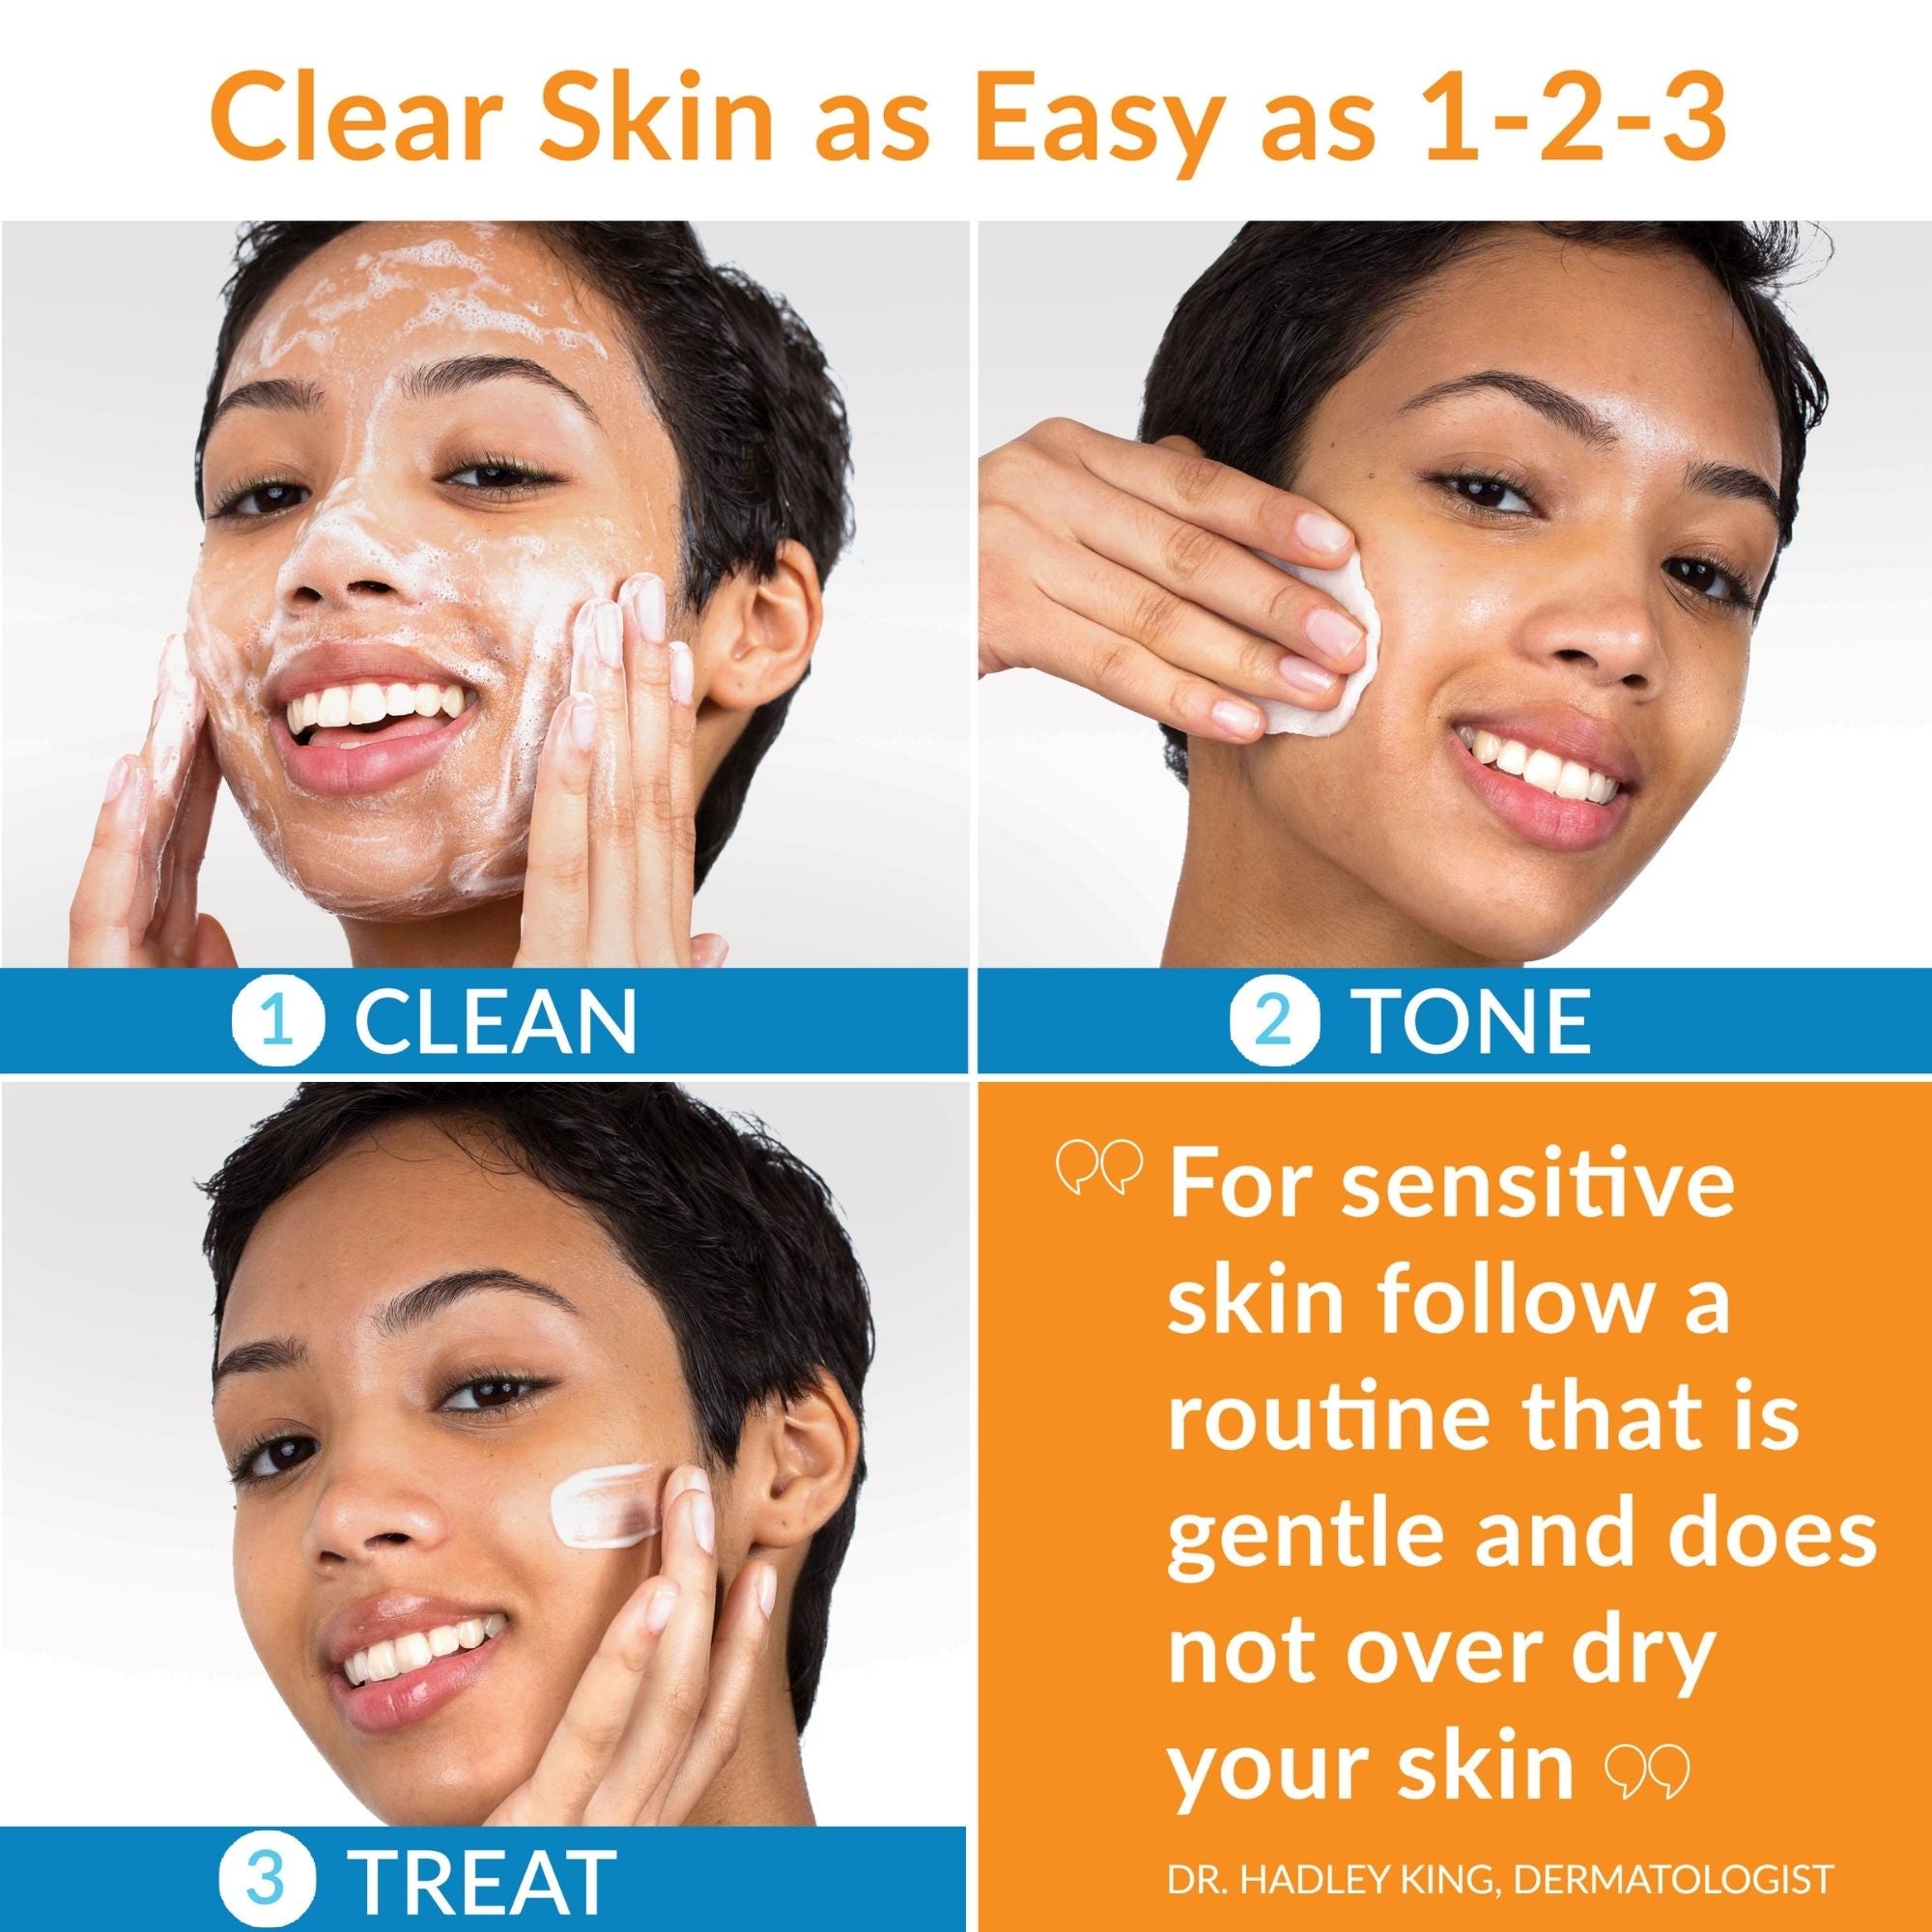 Sensitive Skin 24 HR Clearing System